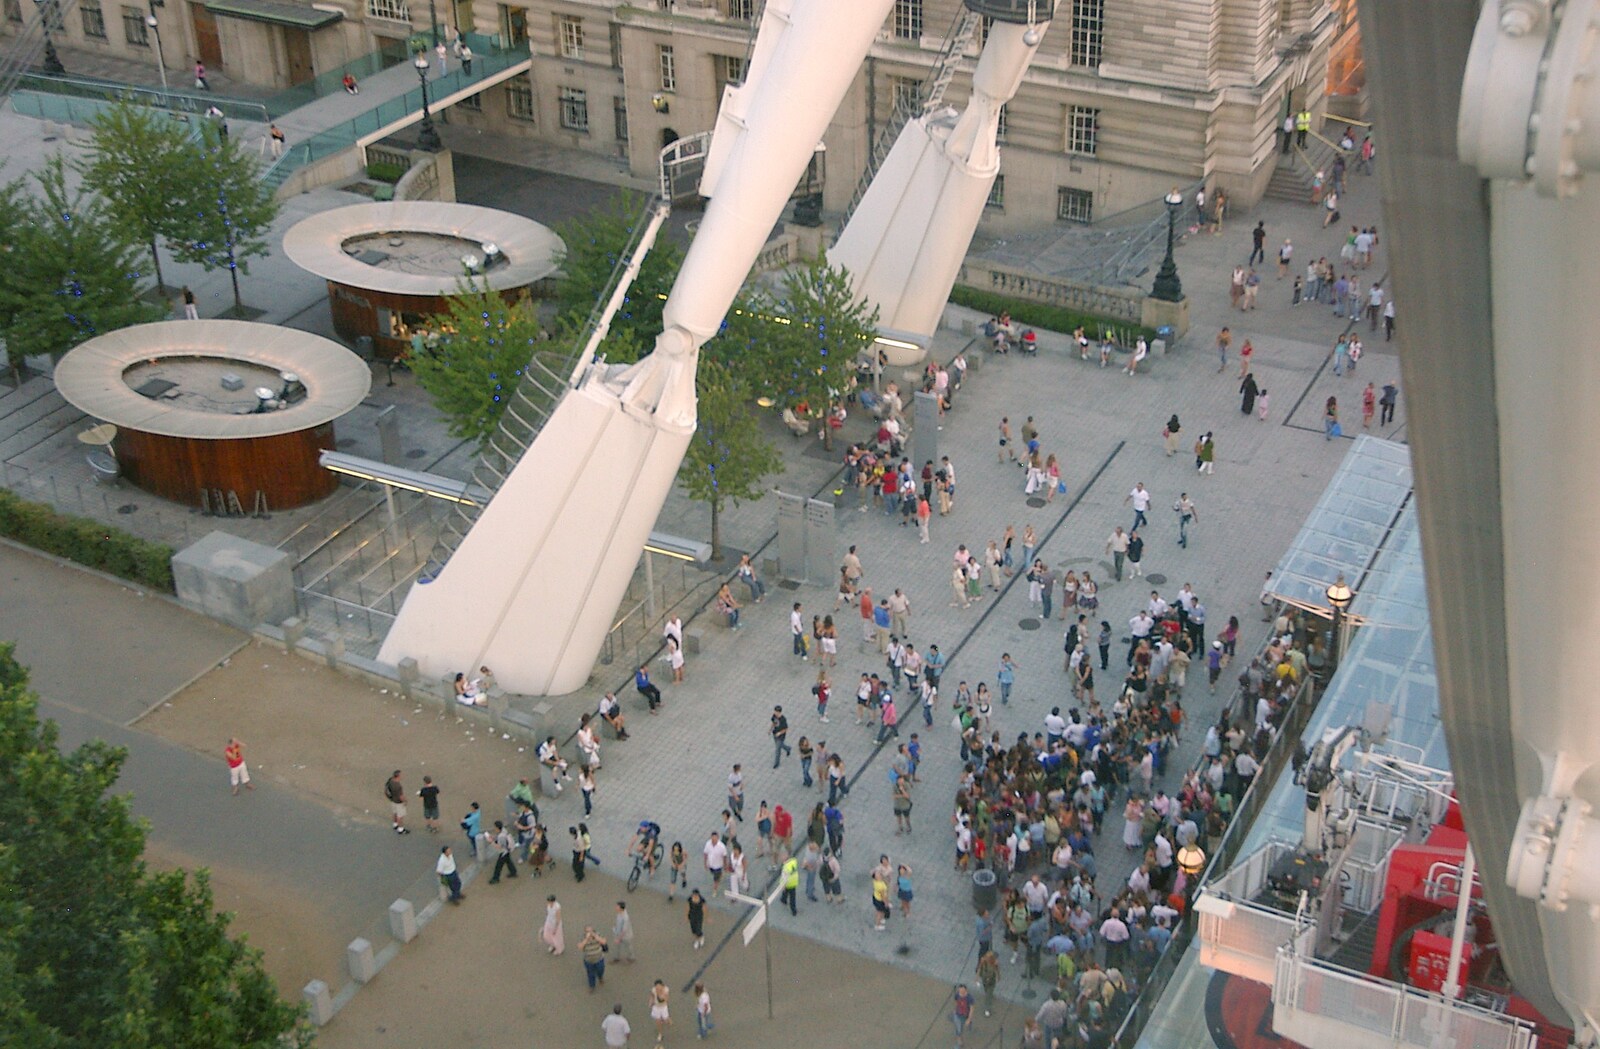 A view of the mingling crowds from A Trip on the London Eye and Bill's BBQ, London and Suffolk - 21st July 2006